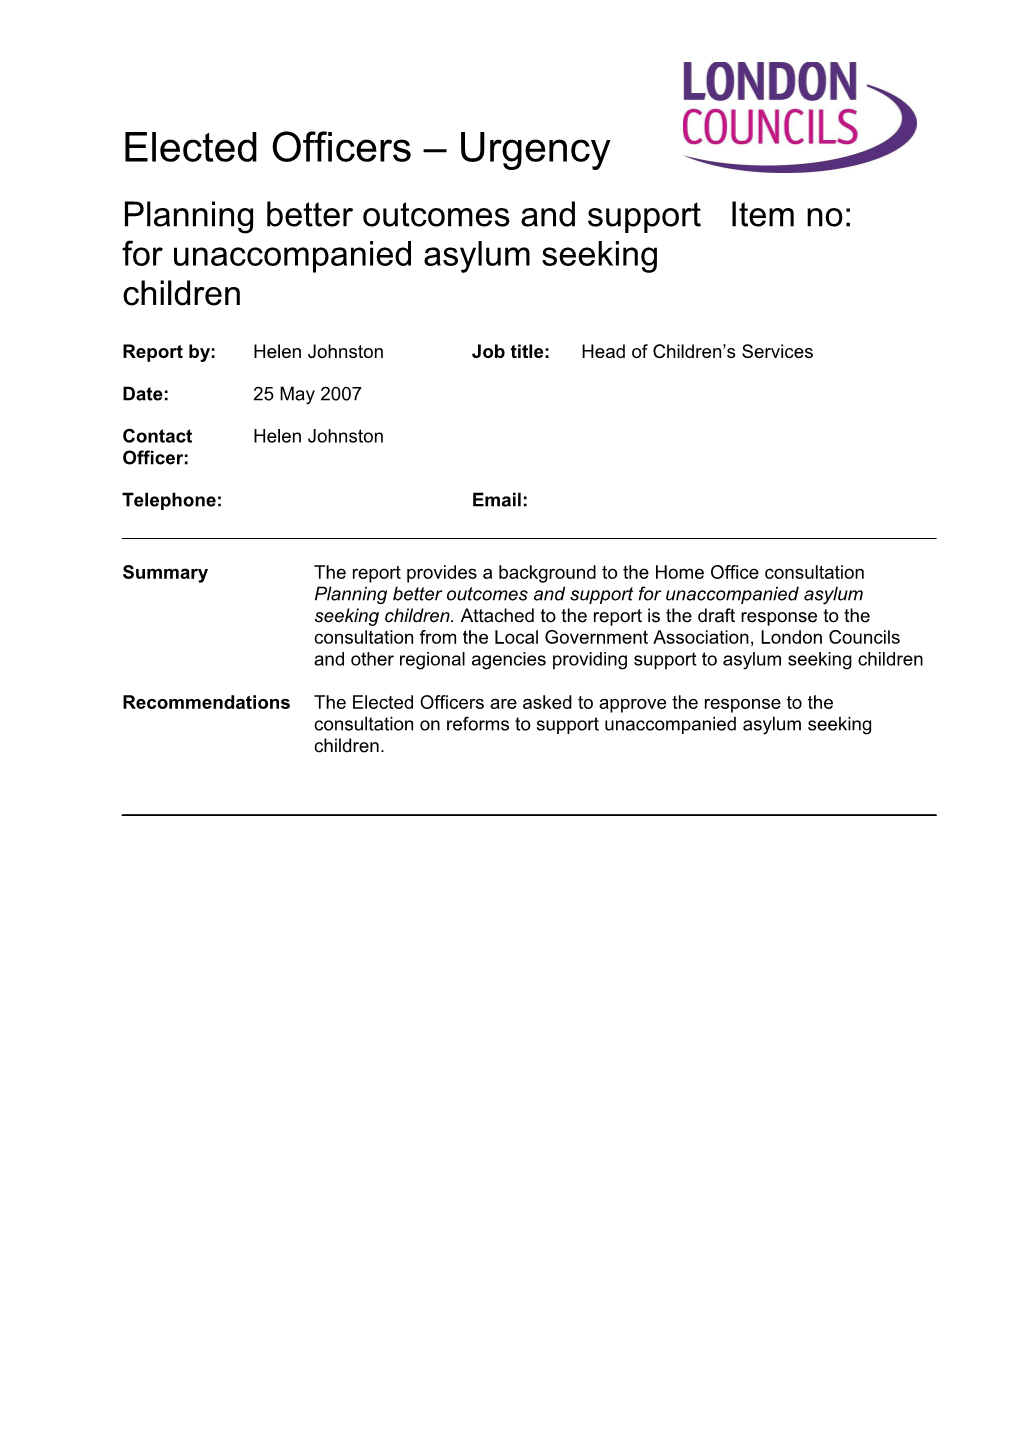 Planning Better Outcomes and Support for Unaccompanied Asylum Seeking Children